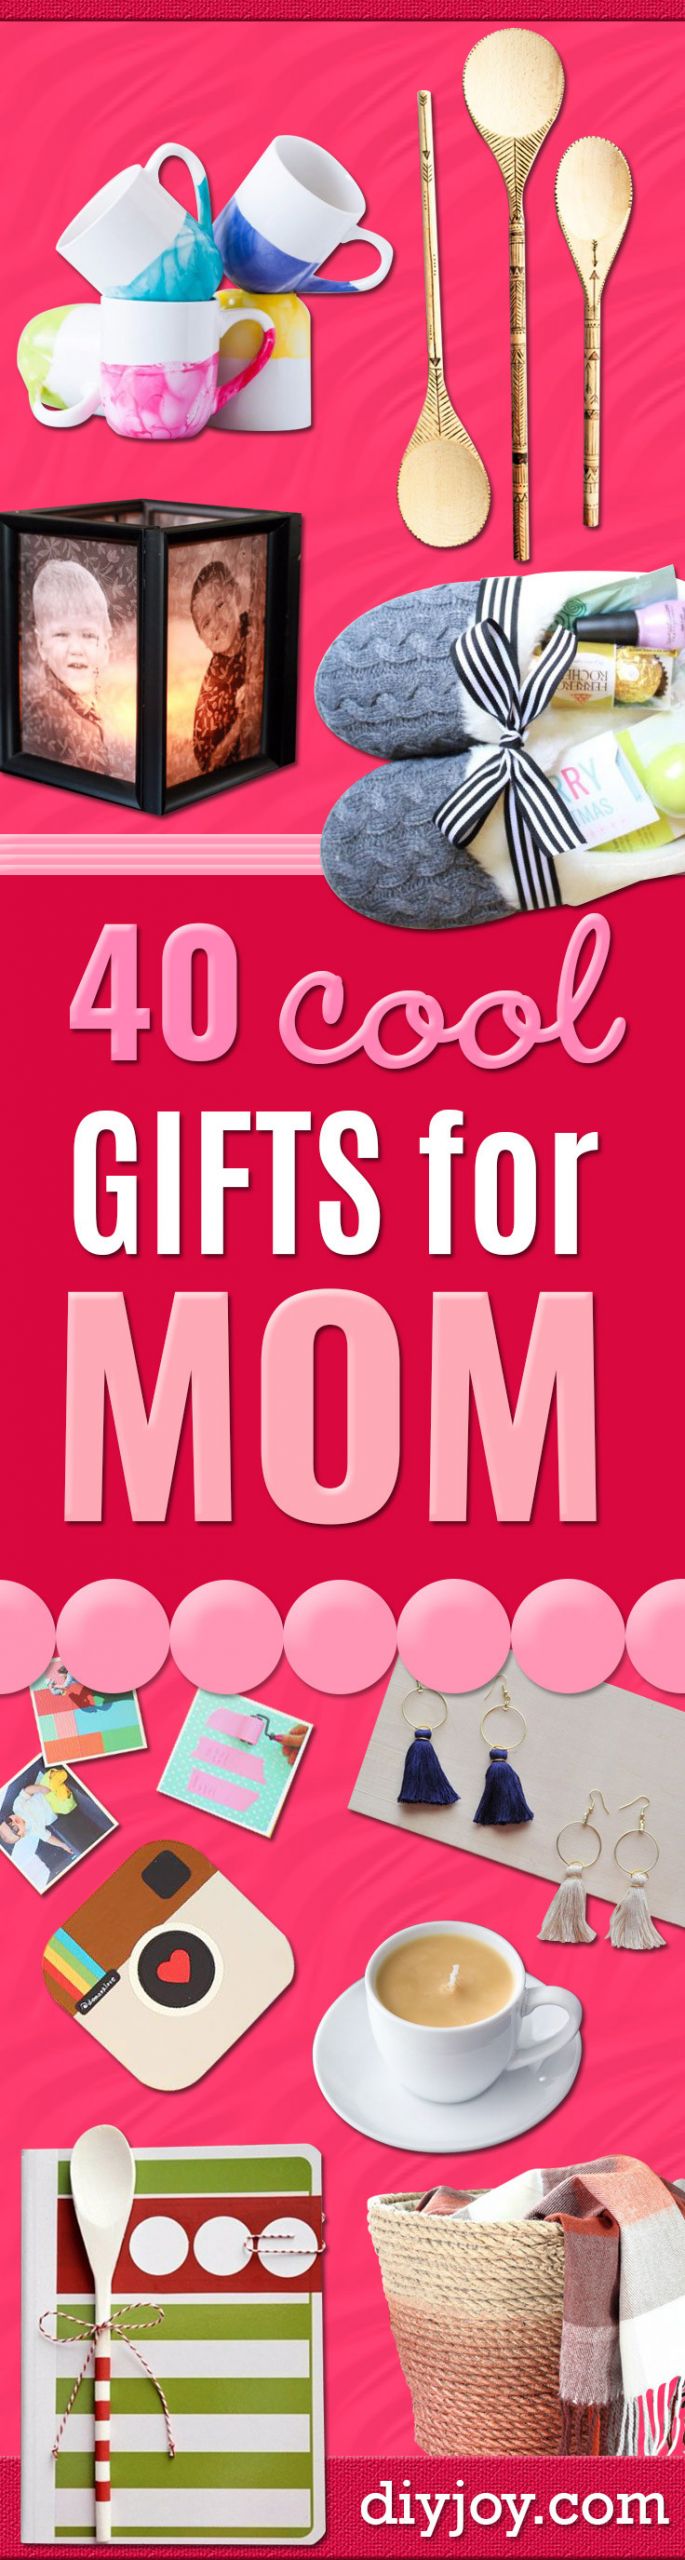 DIY Mom Christmas Gifts
 40 Coolest Gifts To Make for Mom